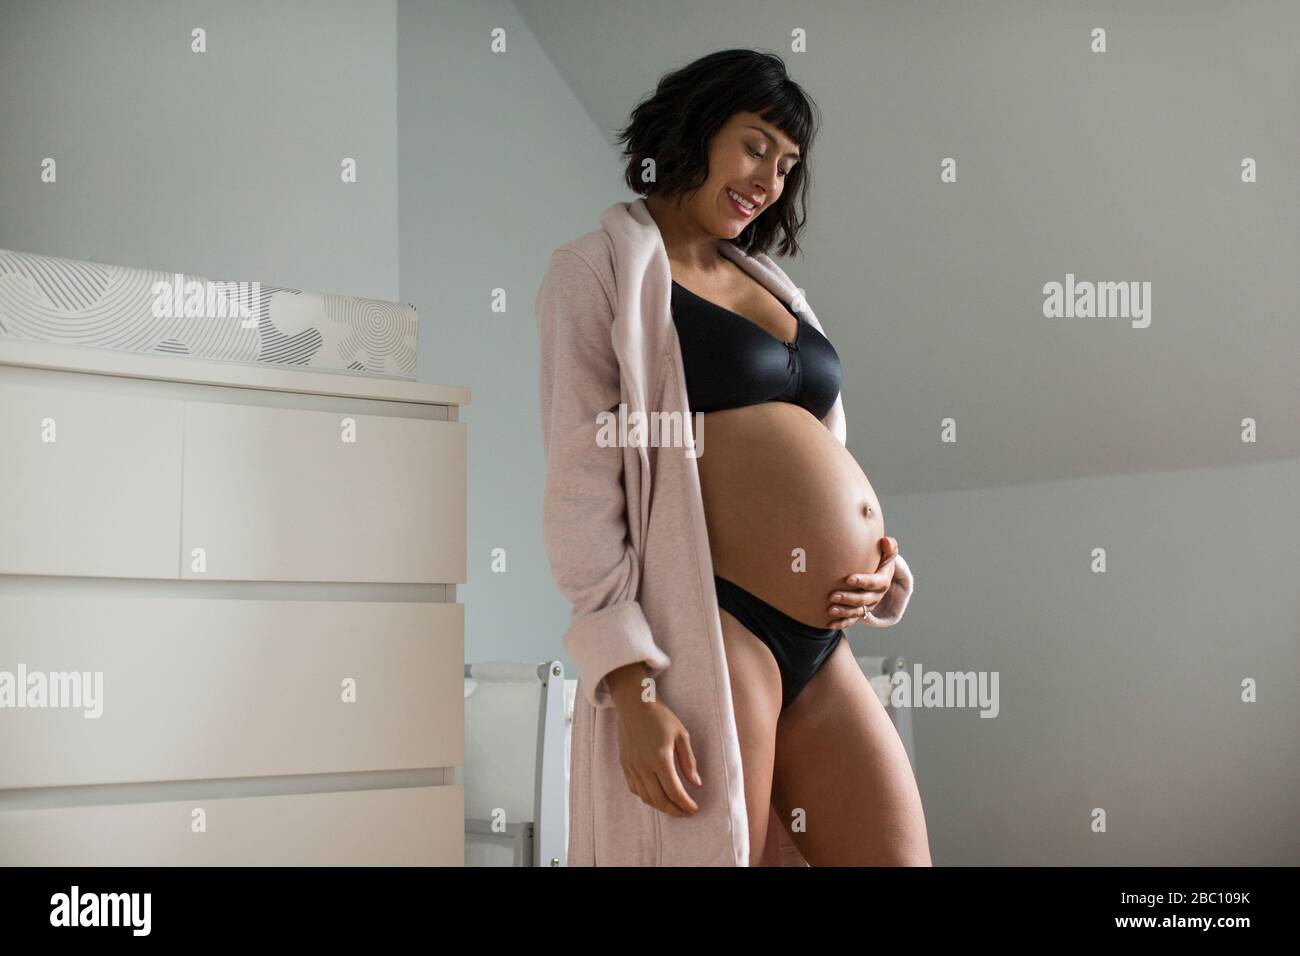 Indian teenager girl woman in lace bra and panty - Model Release #403 Stock  Photo - Alamy